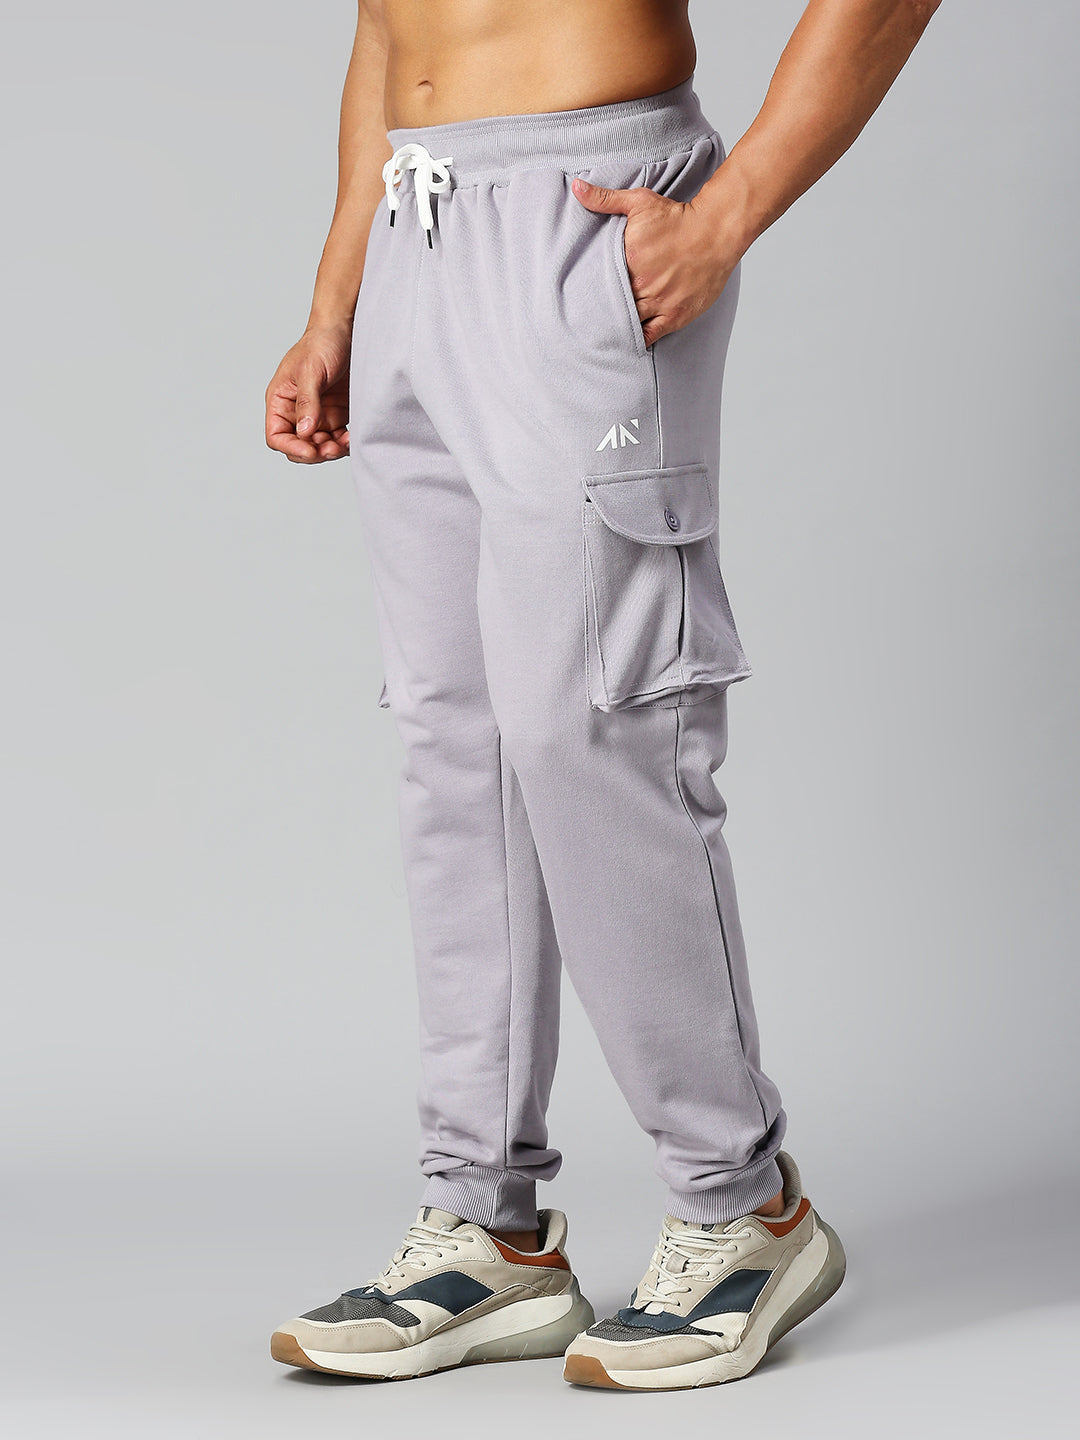 Track Pants for Mens | Sports Pants | Casual Wears | Joggers | Always on  Trend | Comfortable and Stylish to wear (Blue) : Amazon.in: Clothing &  Accessories